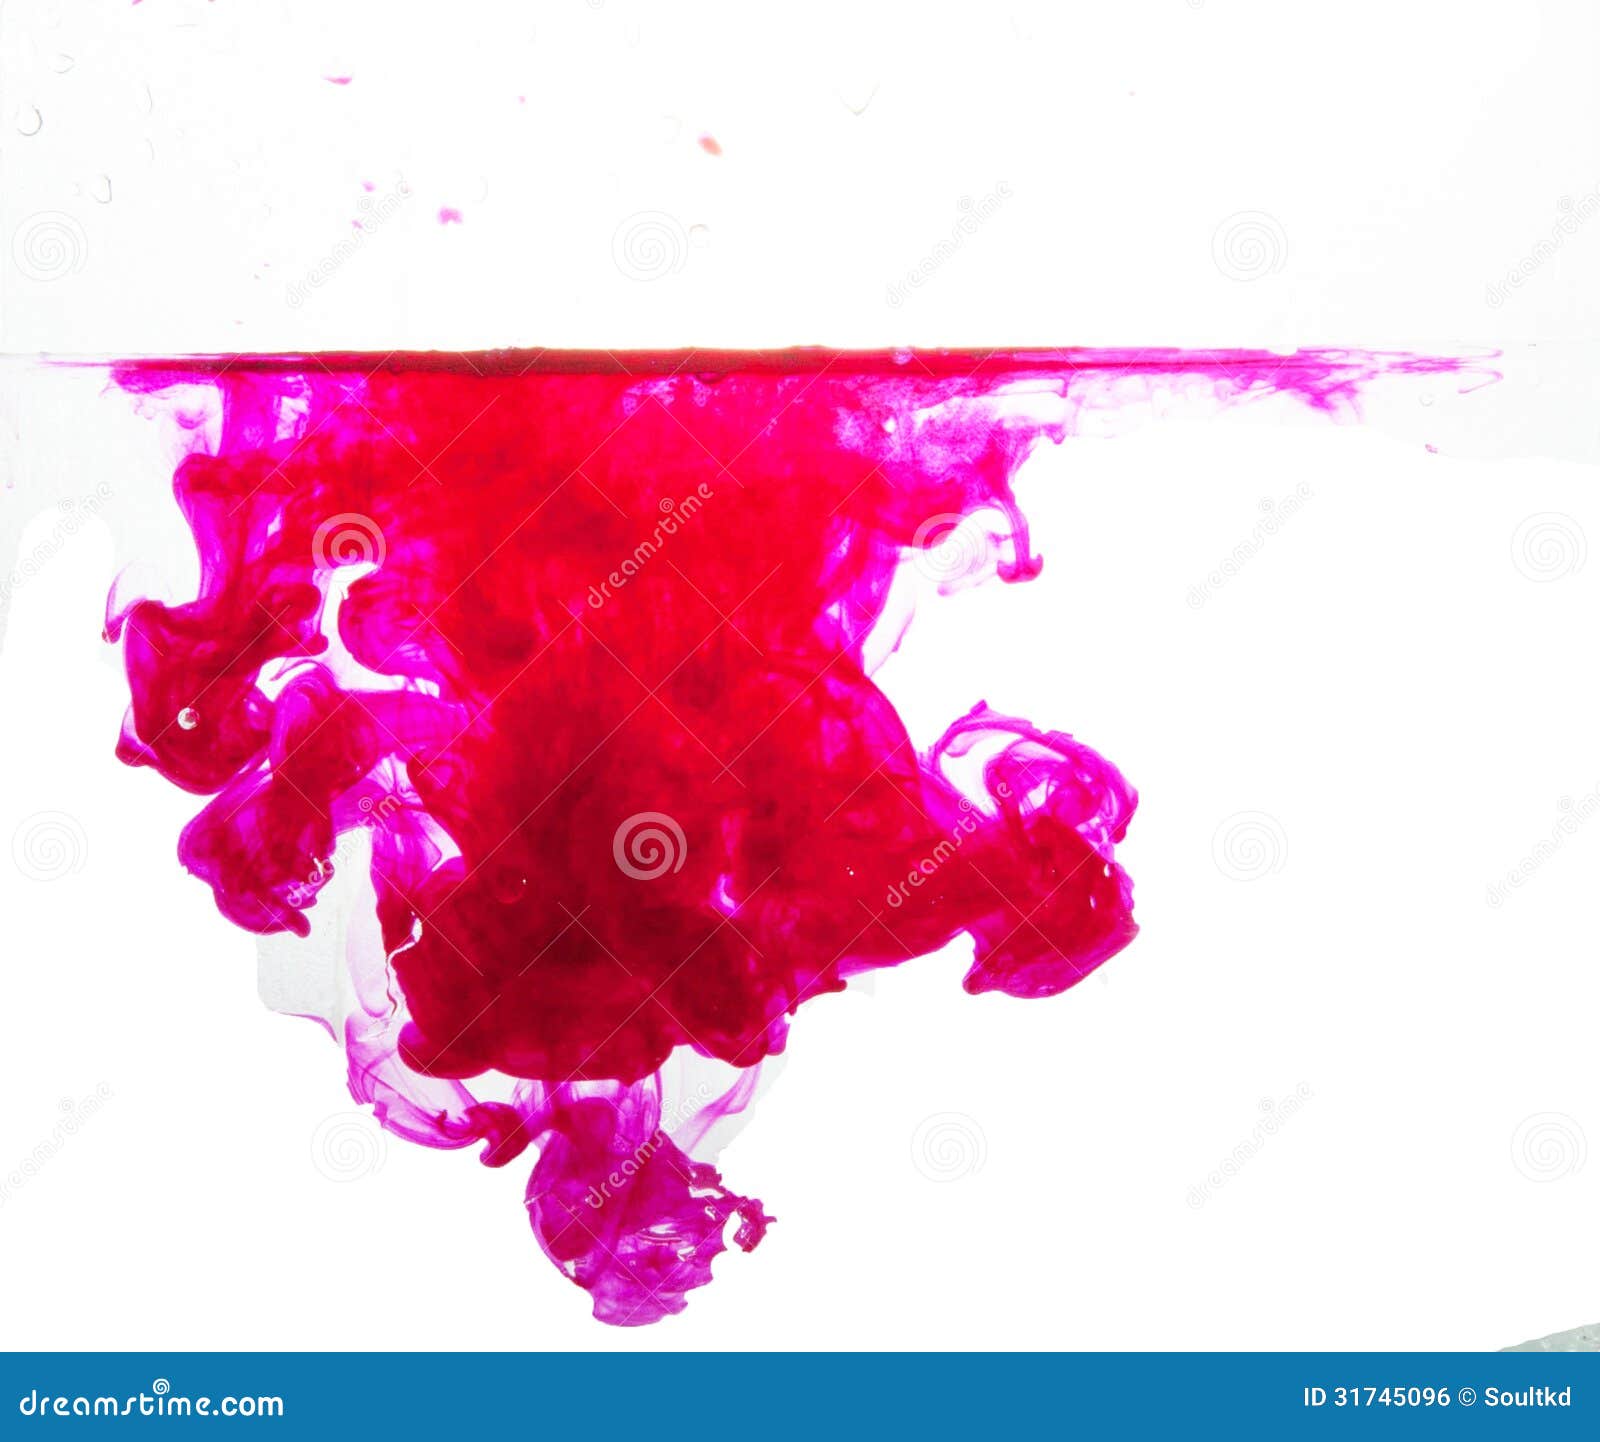 Clear red water splash stock photo. Image of droplet - 31745096